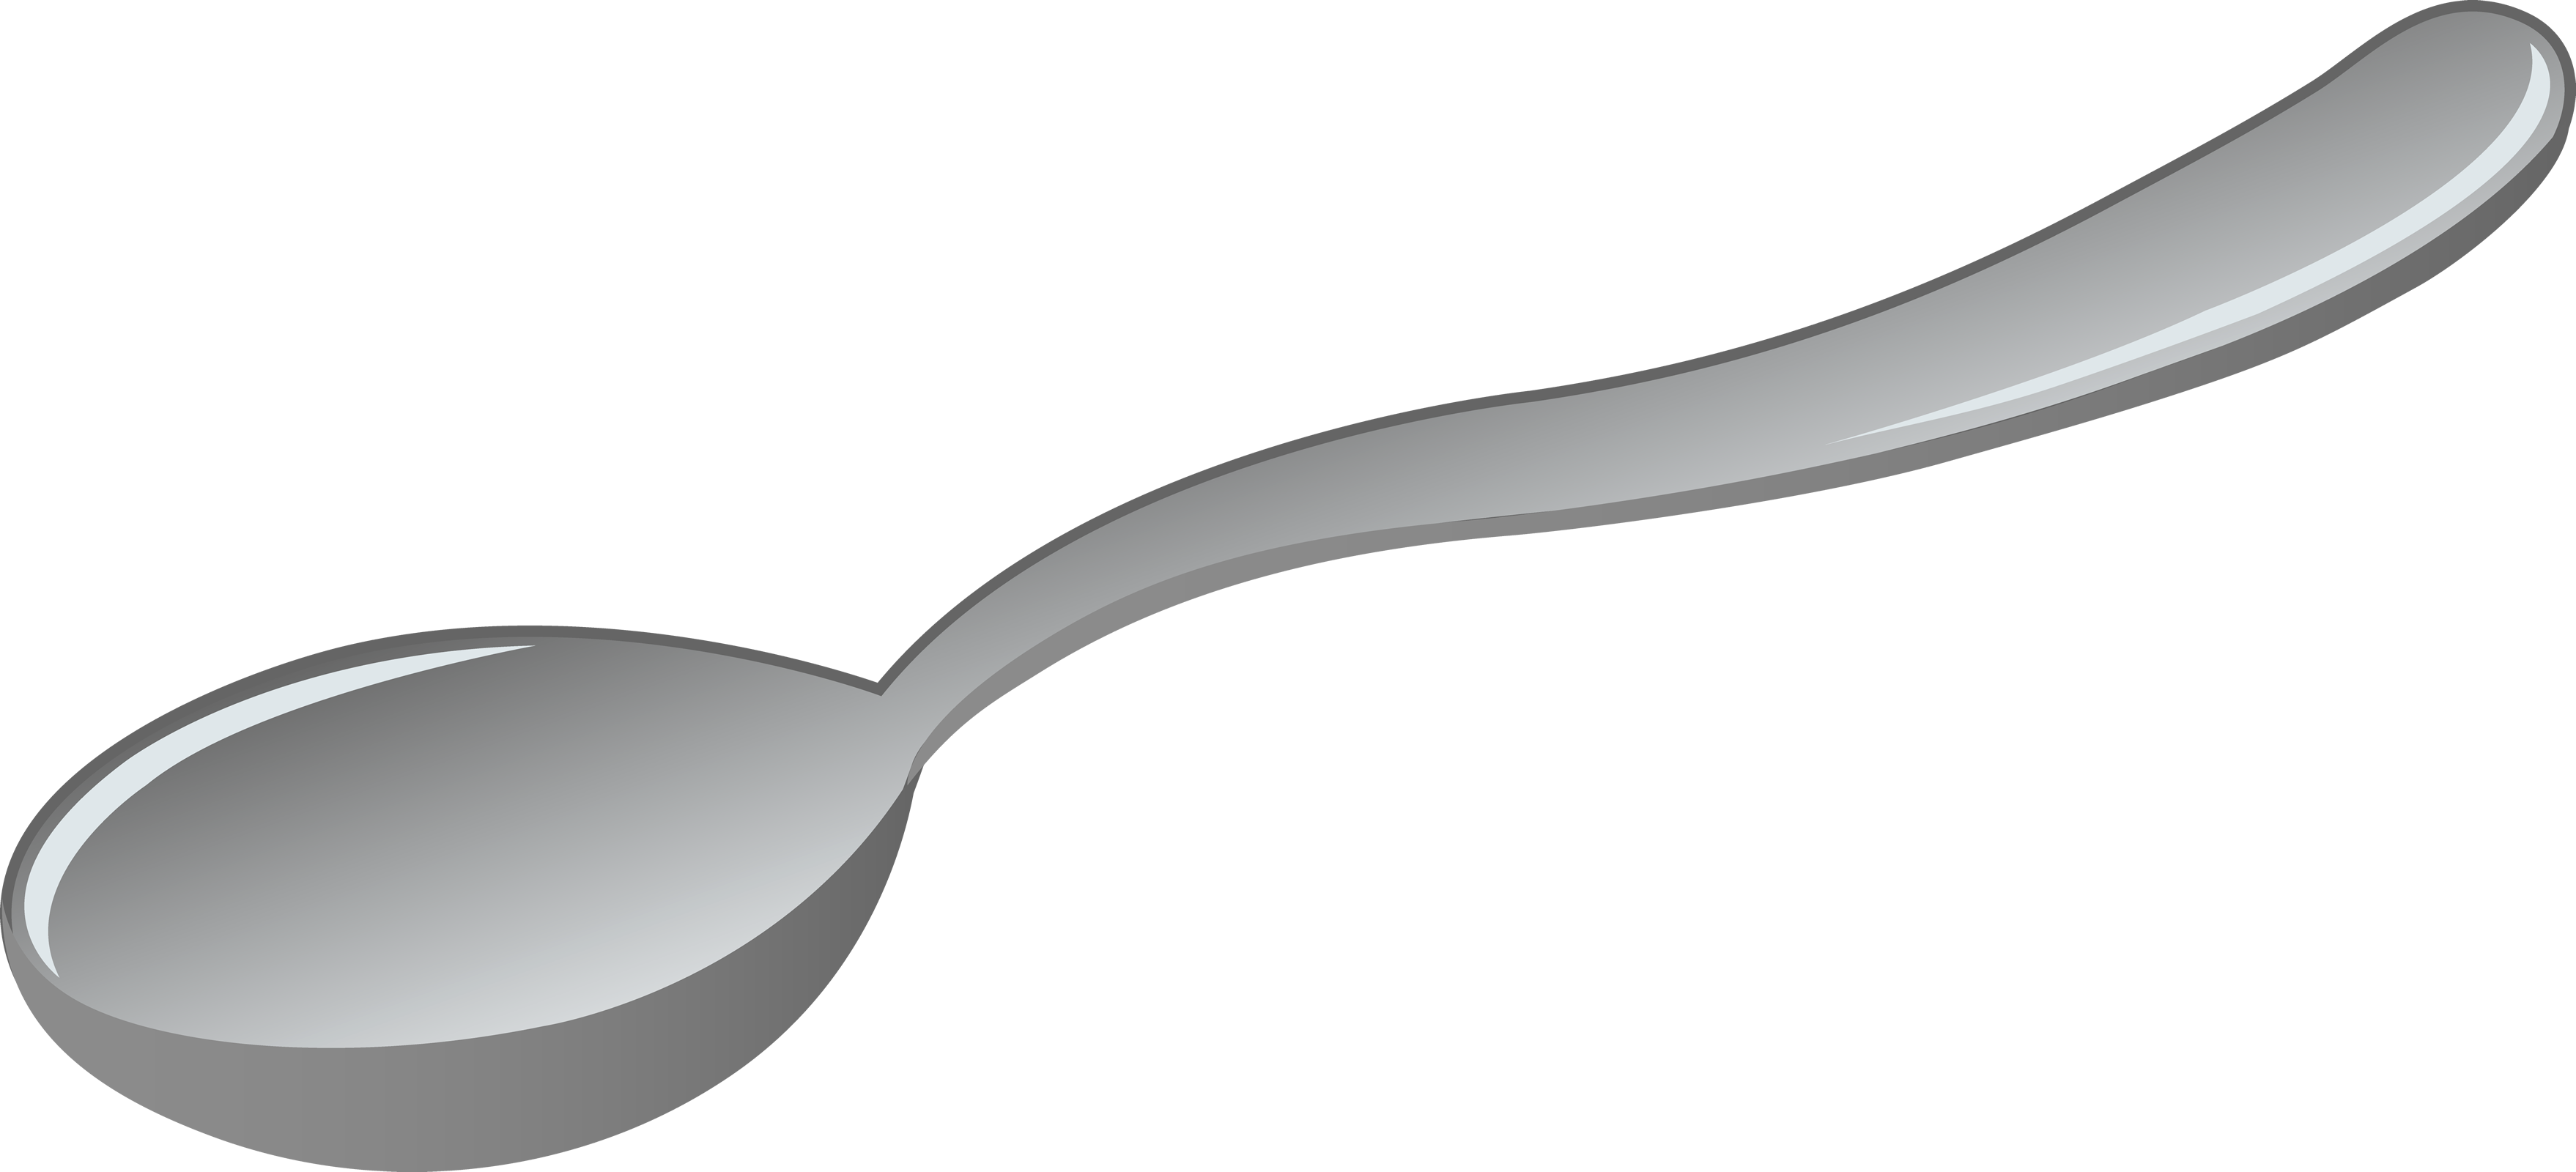  collection of spoon. Soup clipart ladel